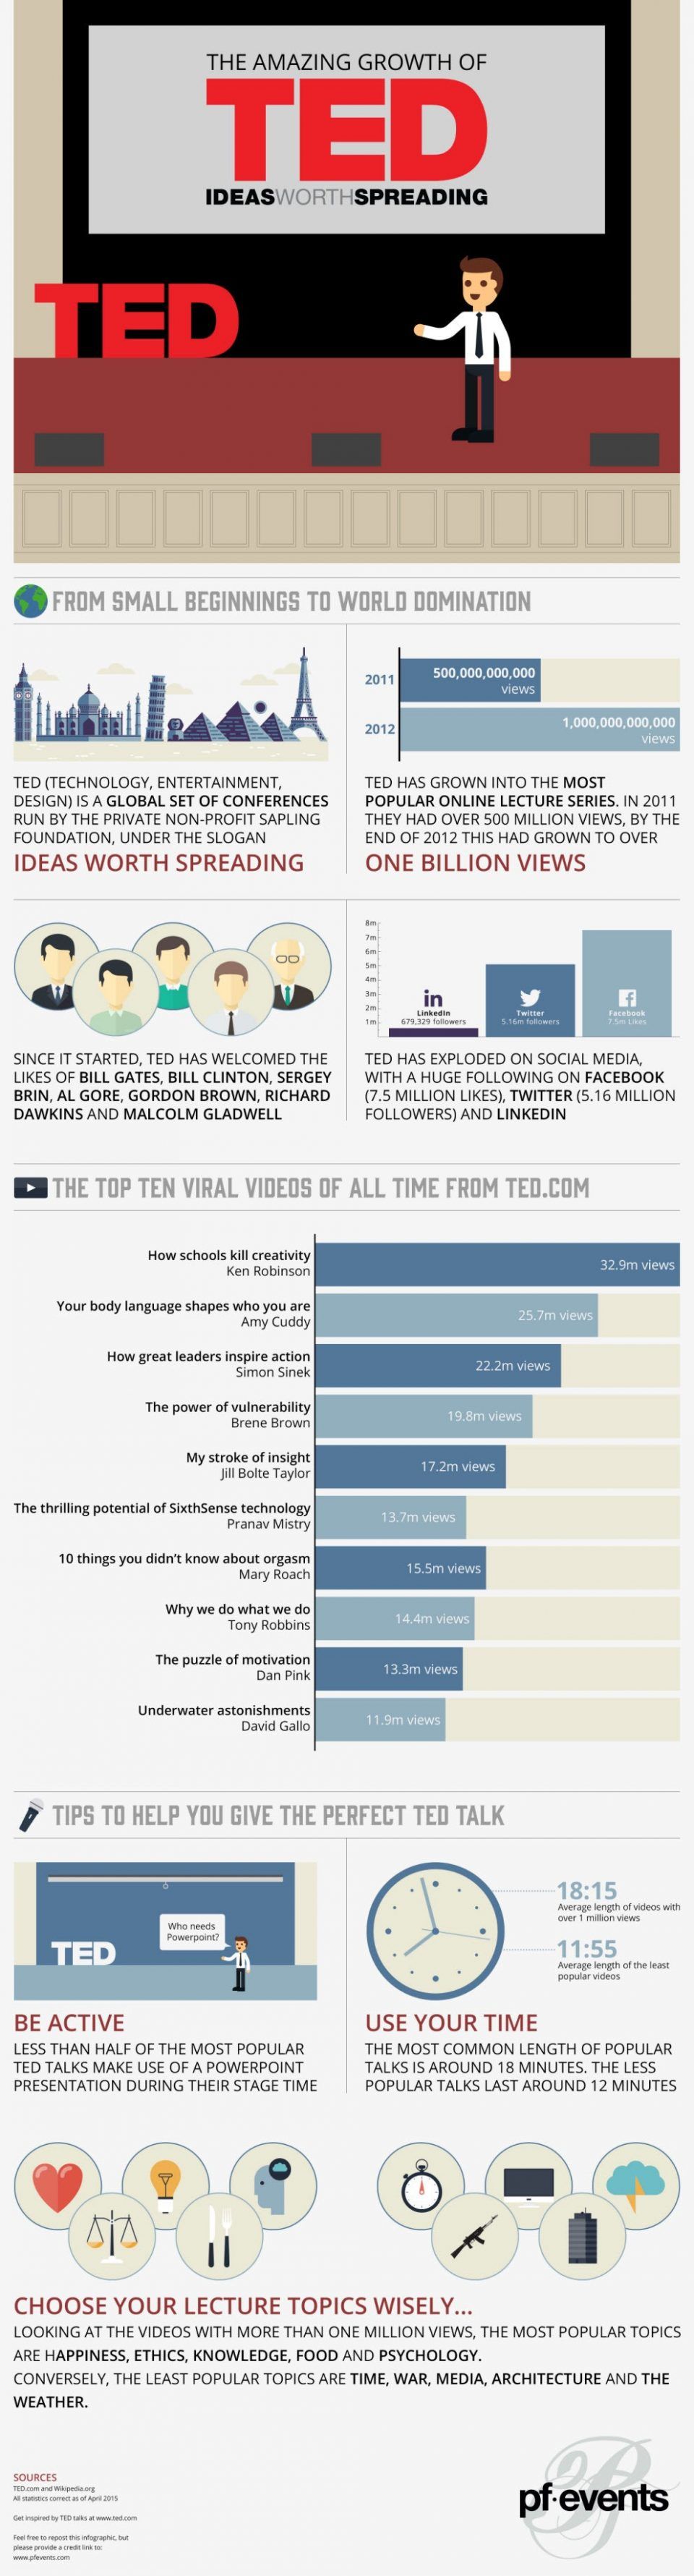 The Amazing Growth of TED Talks Infographic